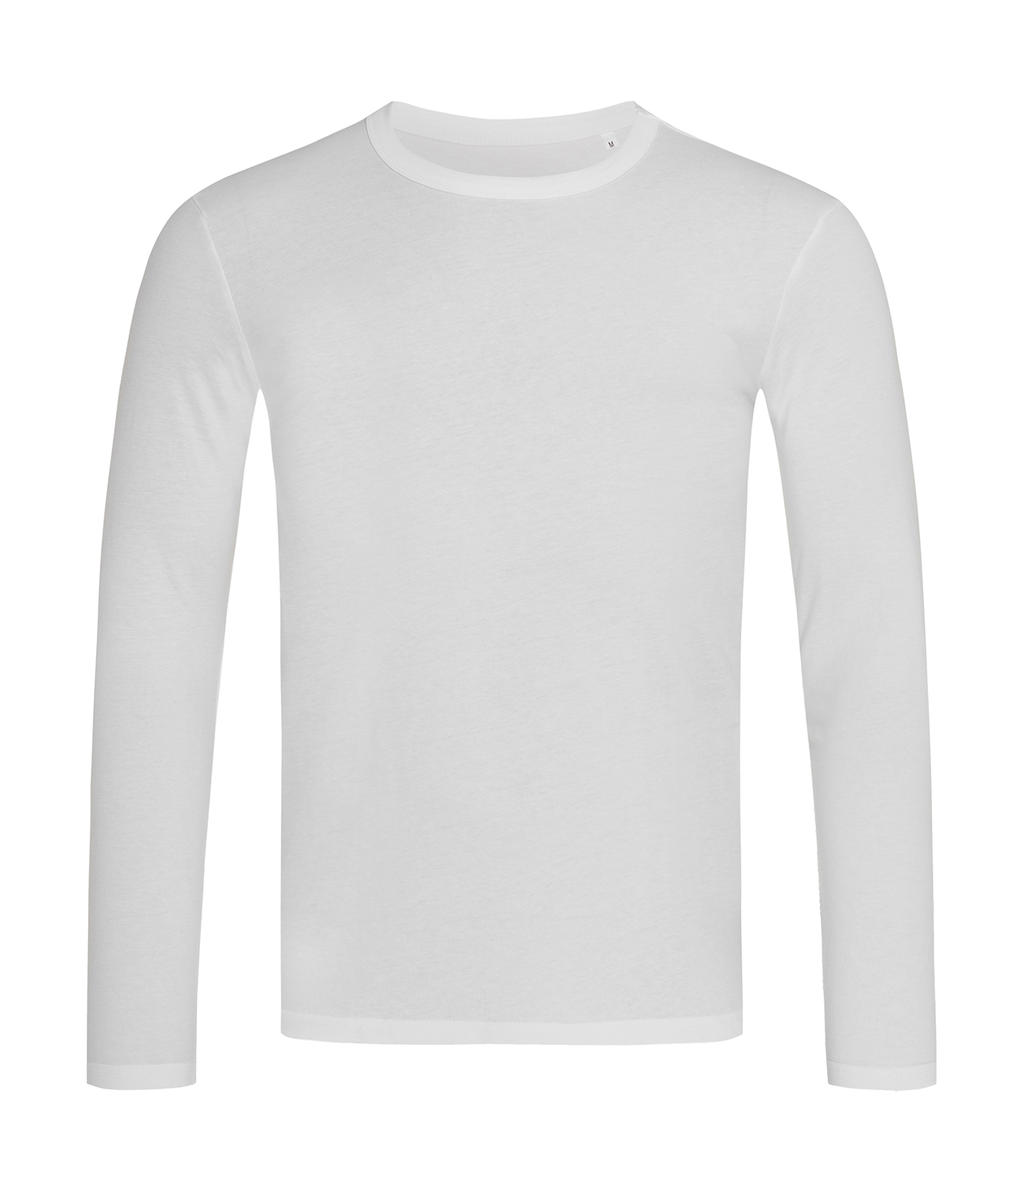  Morgan Long Sleeve  in Farbe White